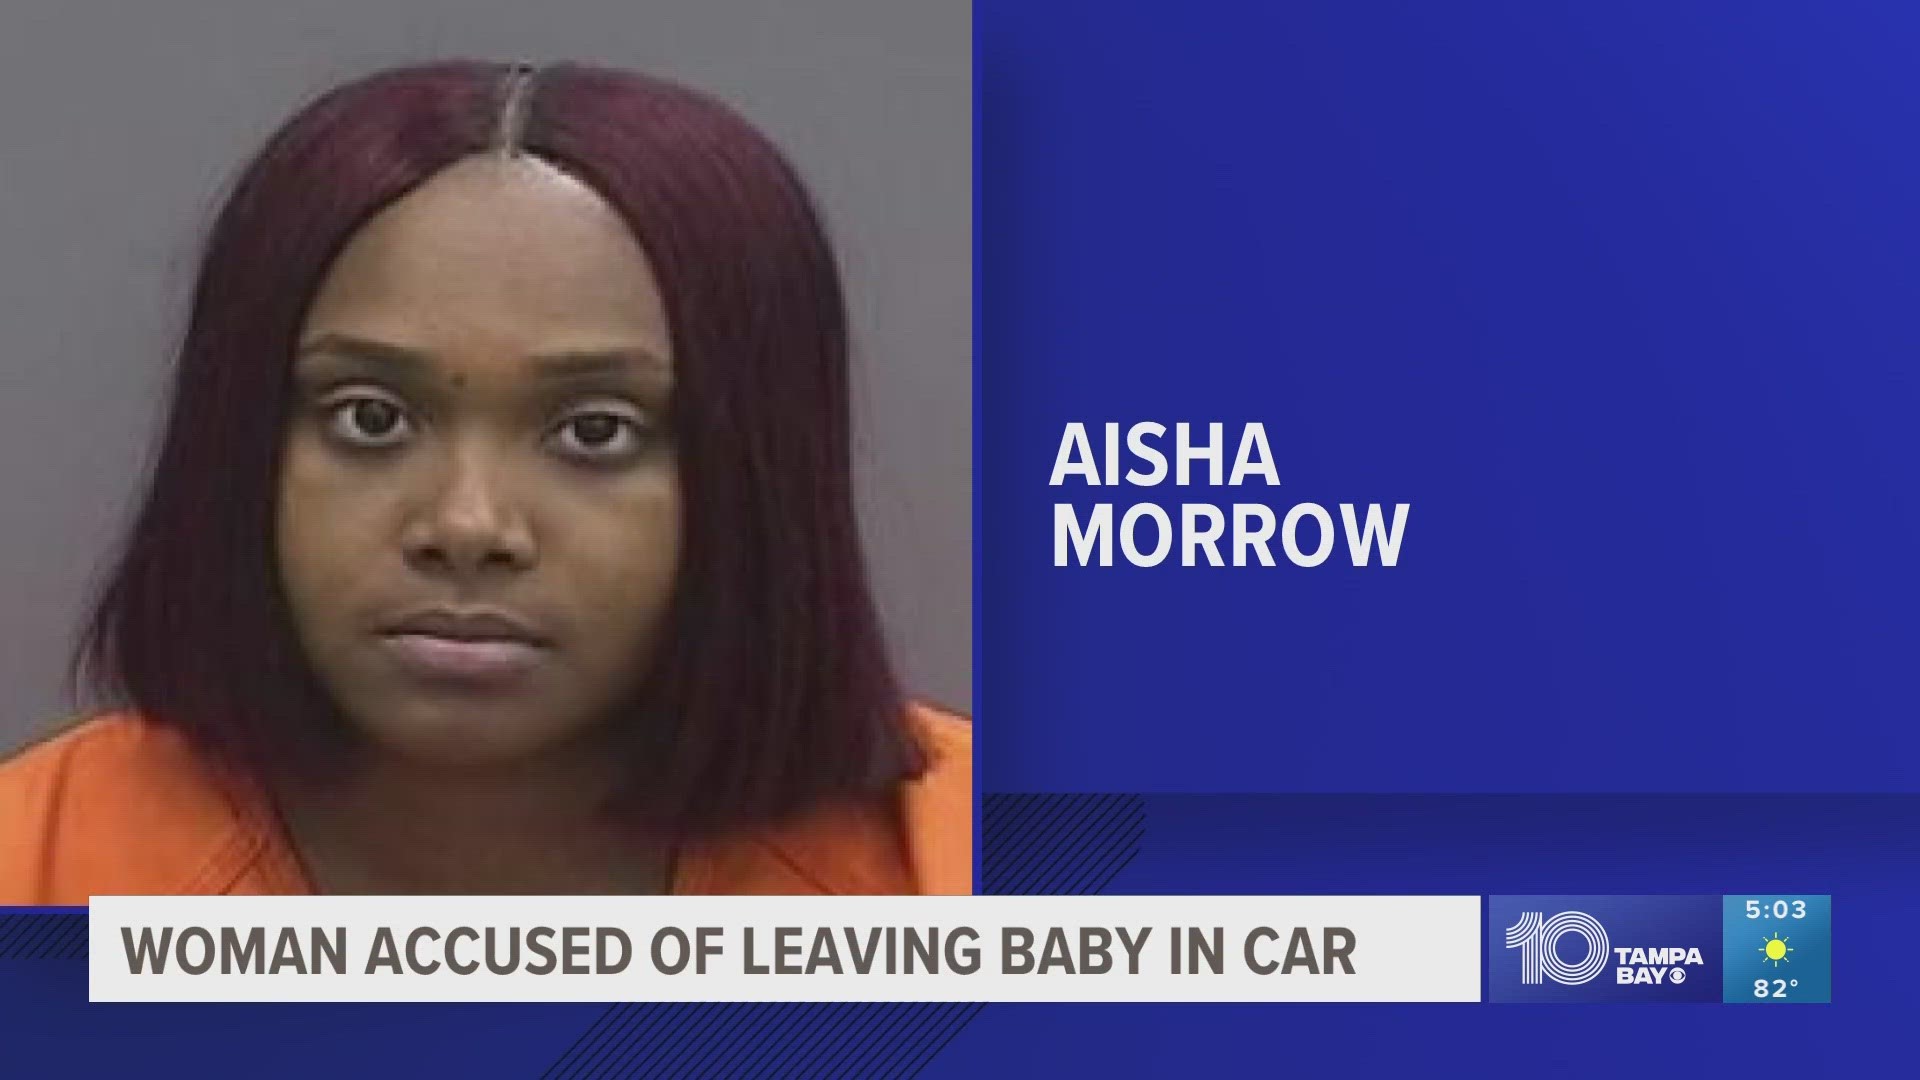 Deputies say the baby could have been inside the car for up to 6 hours.